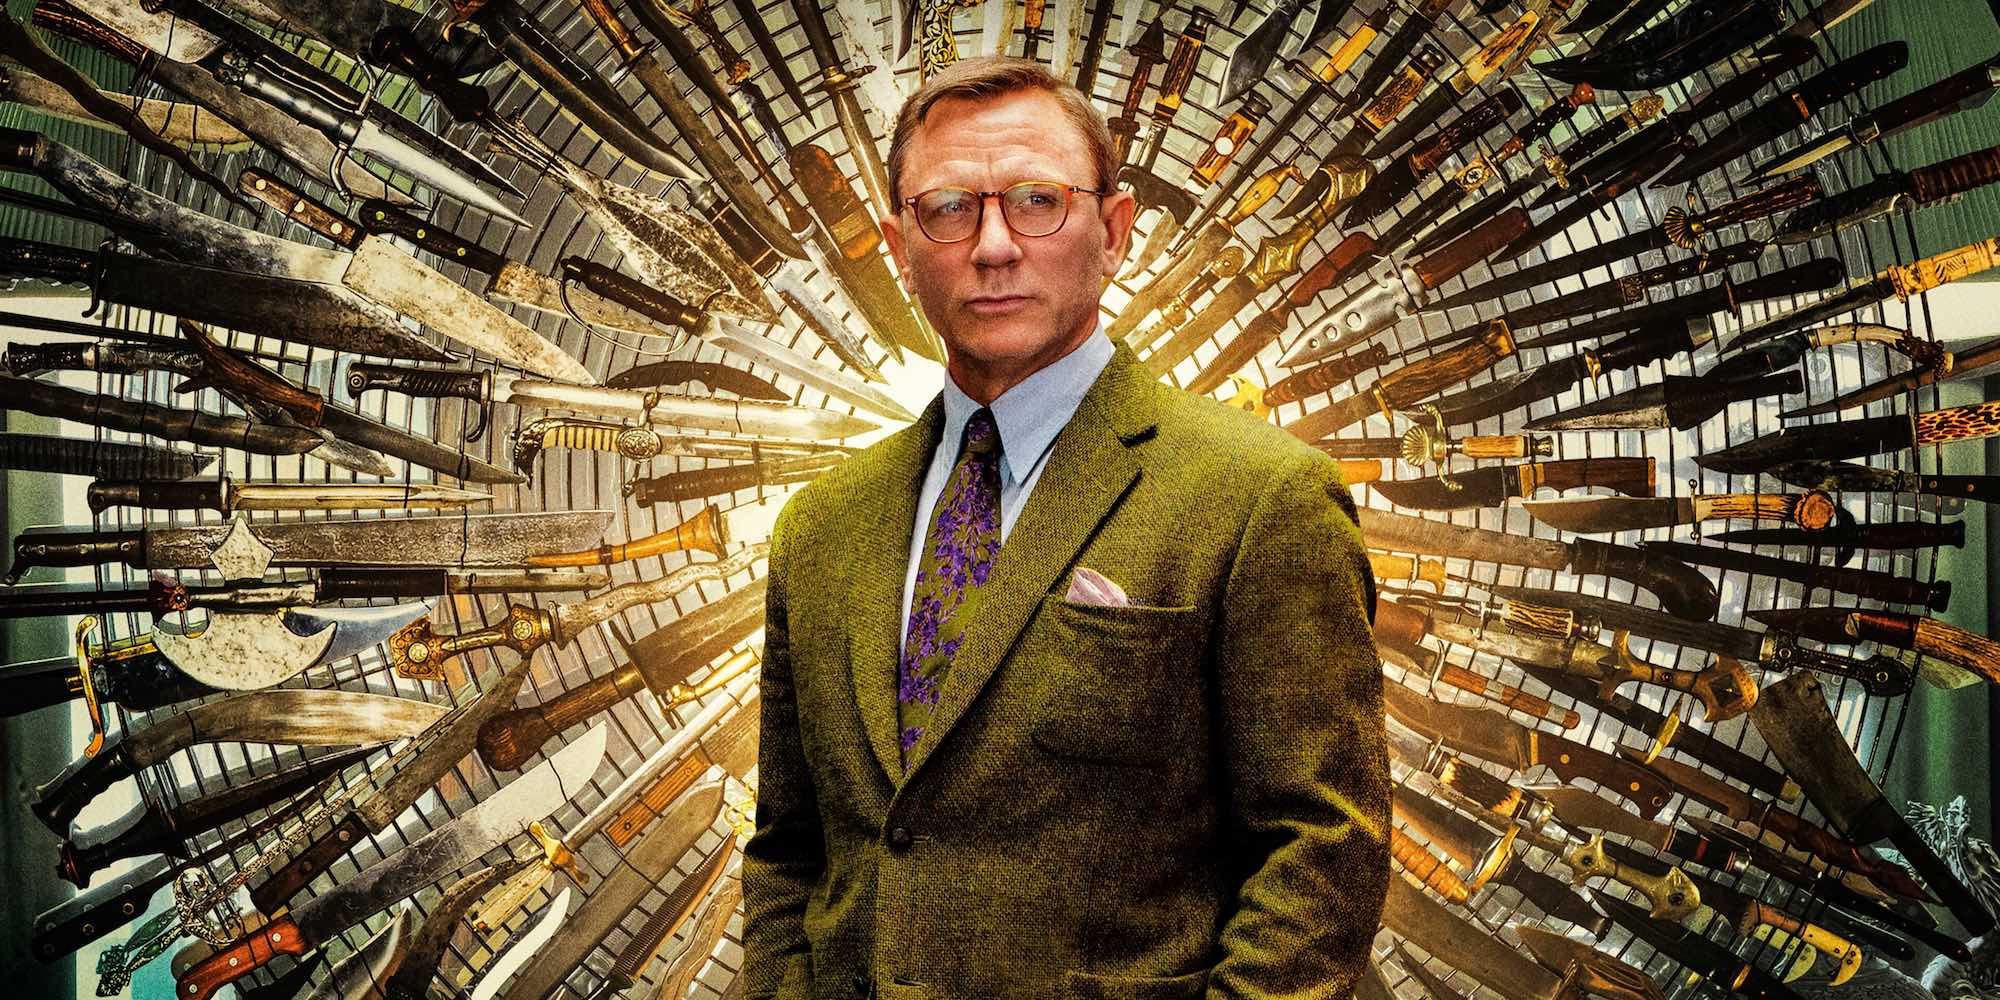 Daniel Craig stands in front of the ring of knives in Knives Out